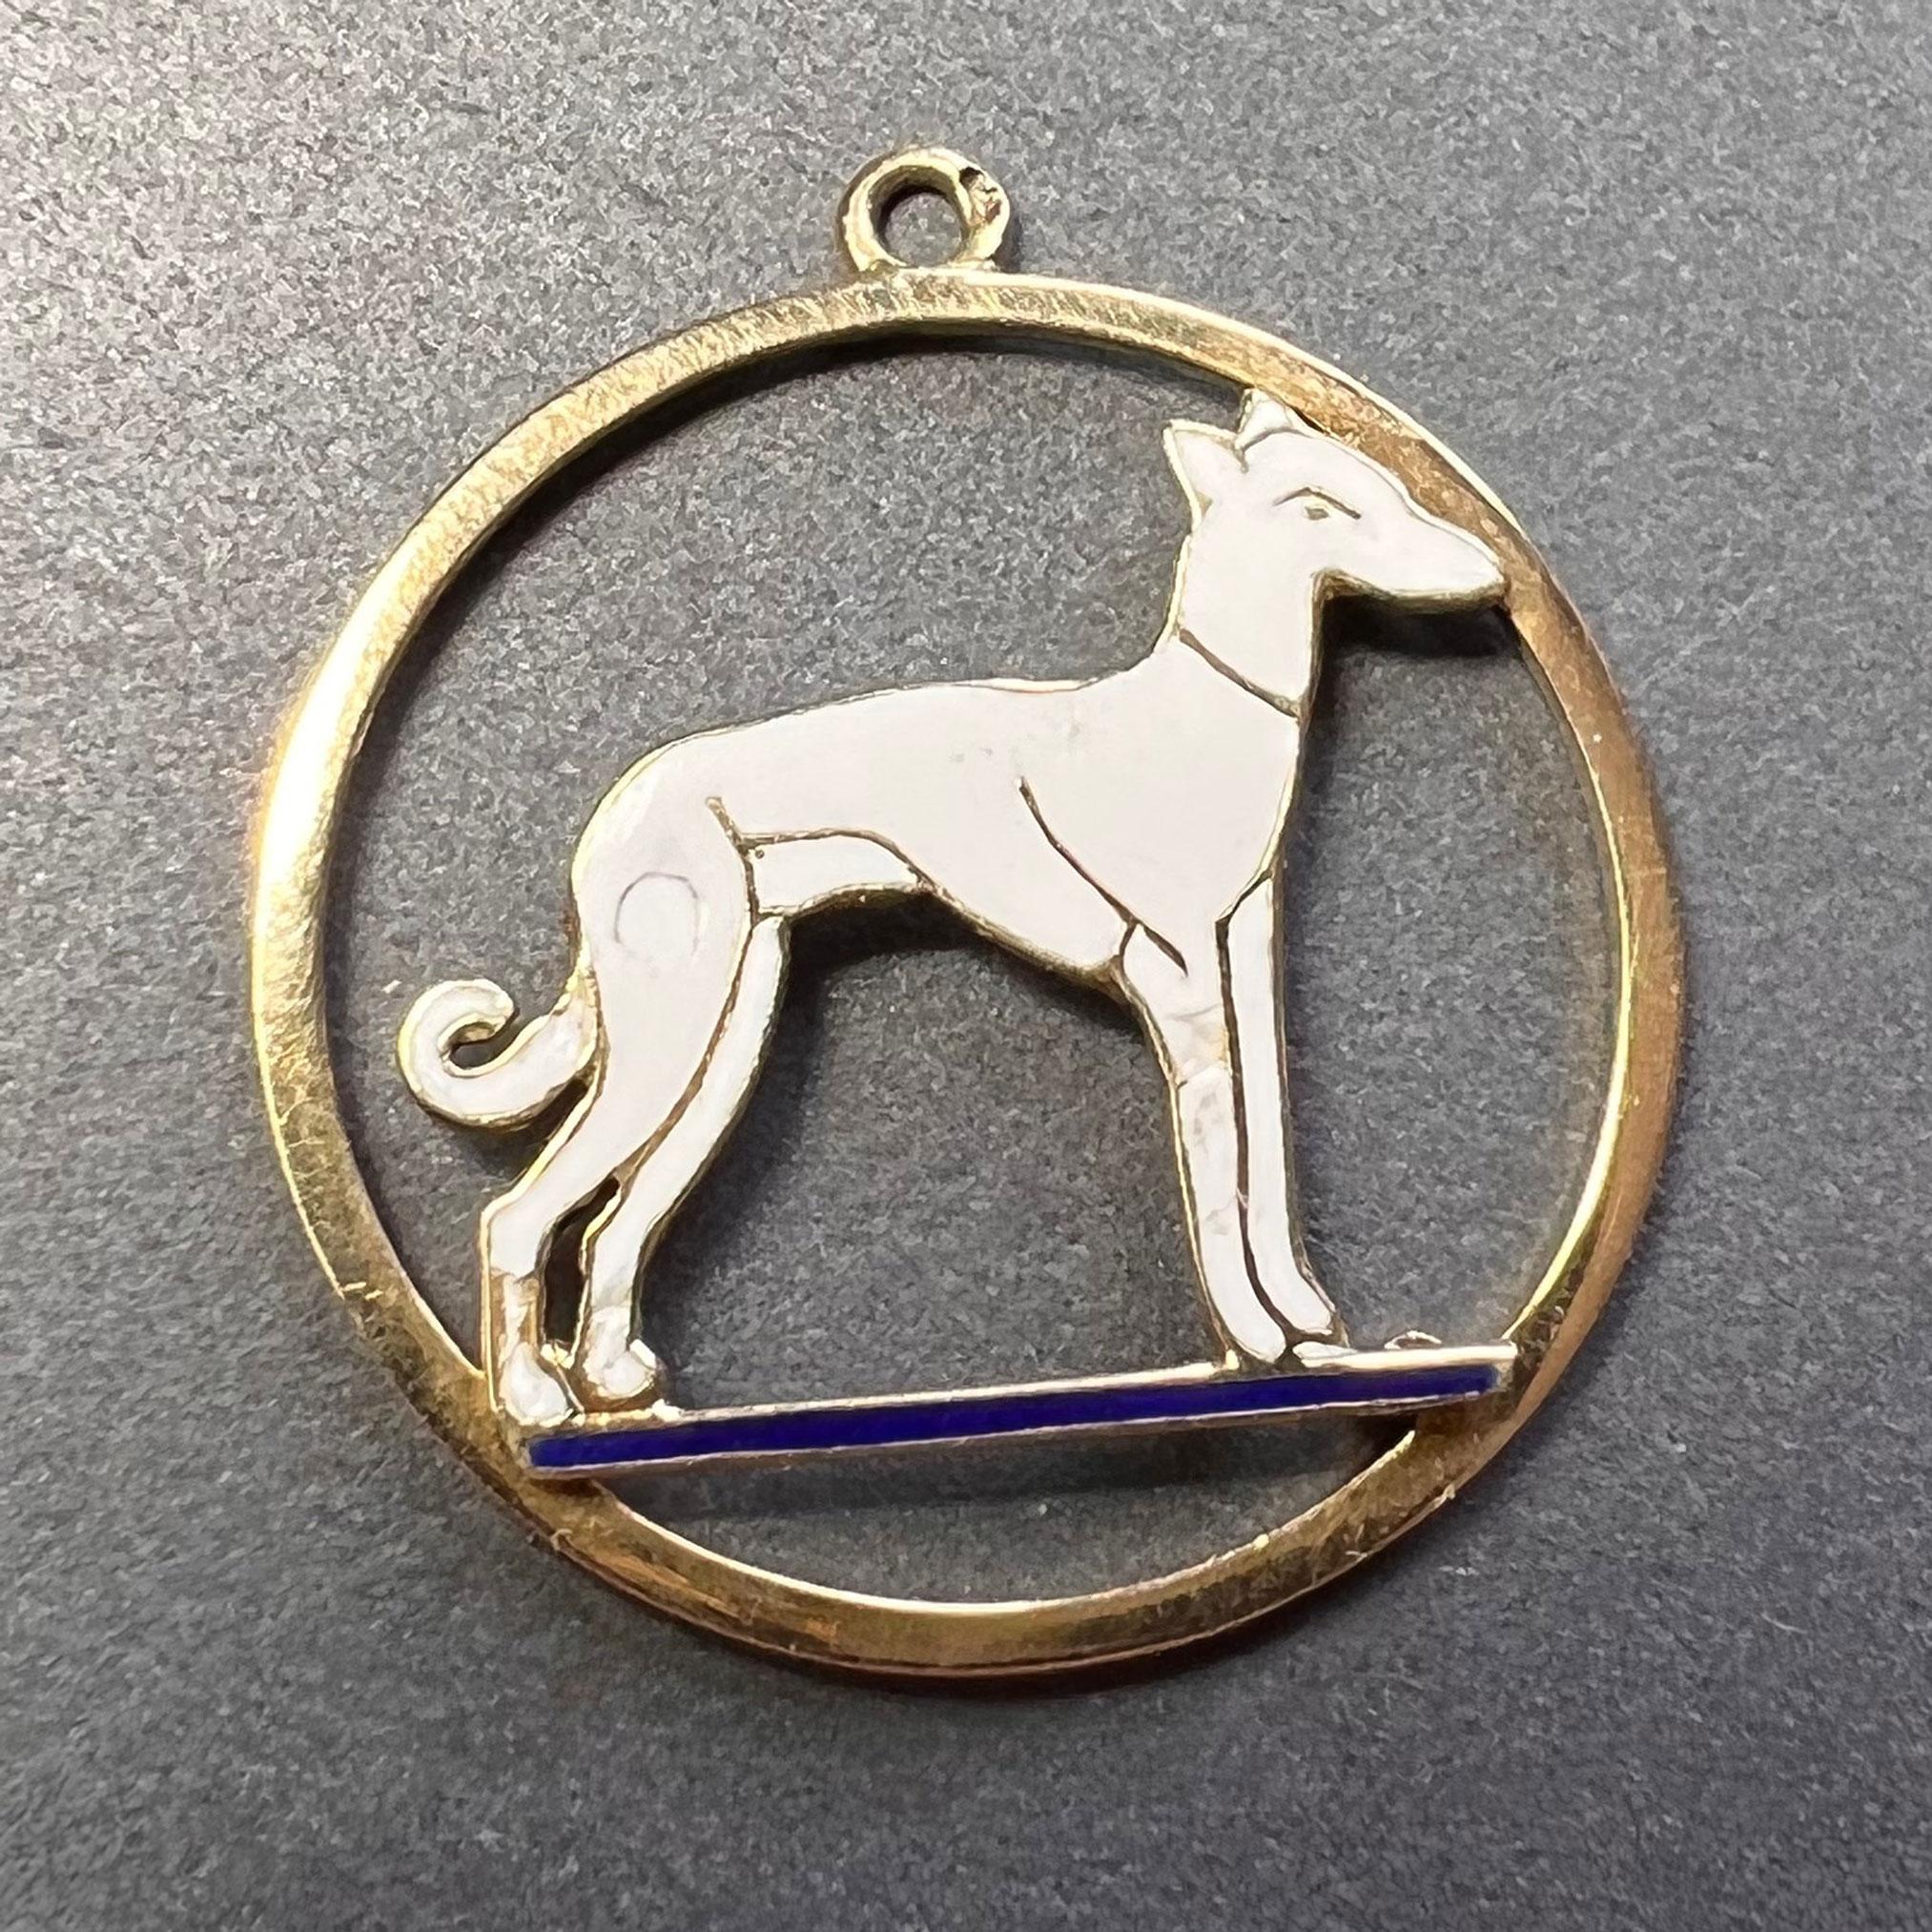 An 18 karat (18K) yellow gold and charm pendant designed as a circle with a white enamel whippet dog standing on a blue enamel ground. Stamped with the eagle mark for 18 karat gold and French manufacture.
 
Dimensions: 2.5 x 2.3 x 0.2 cm (not